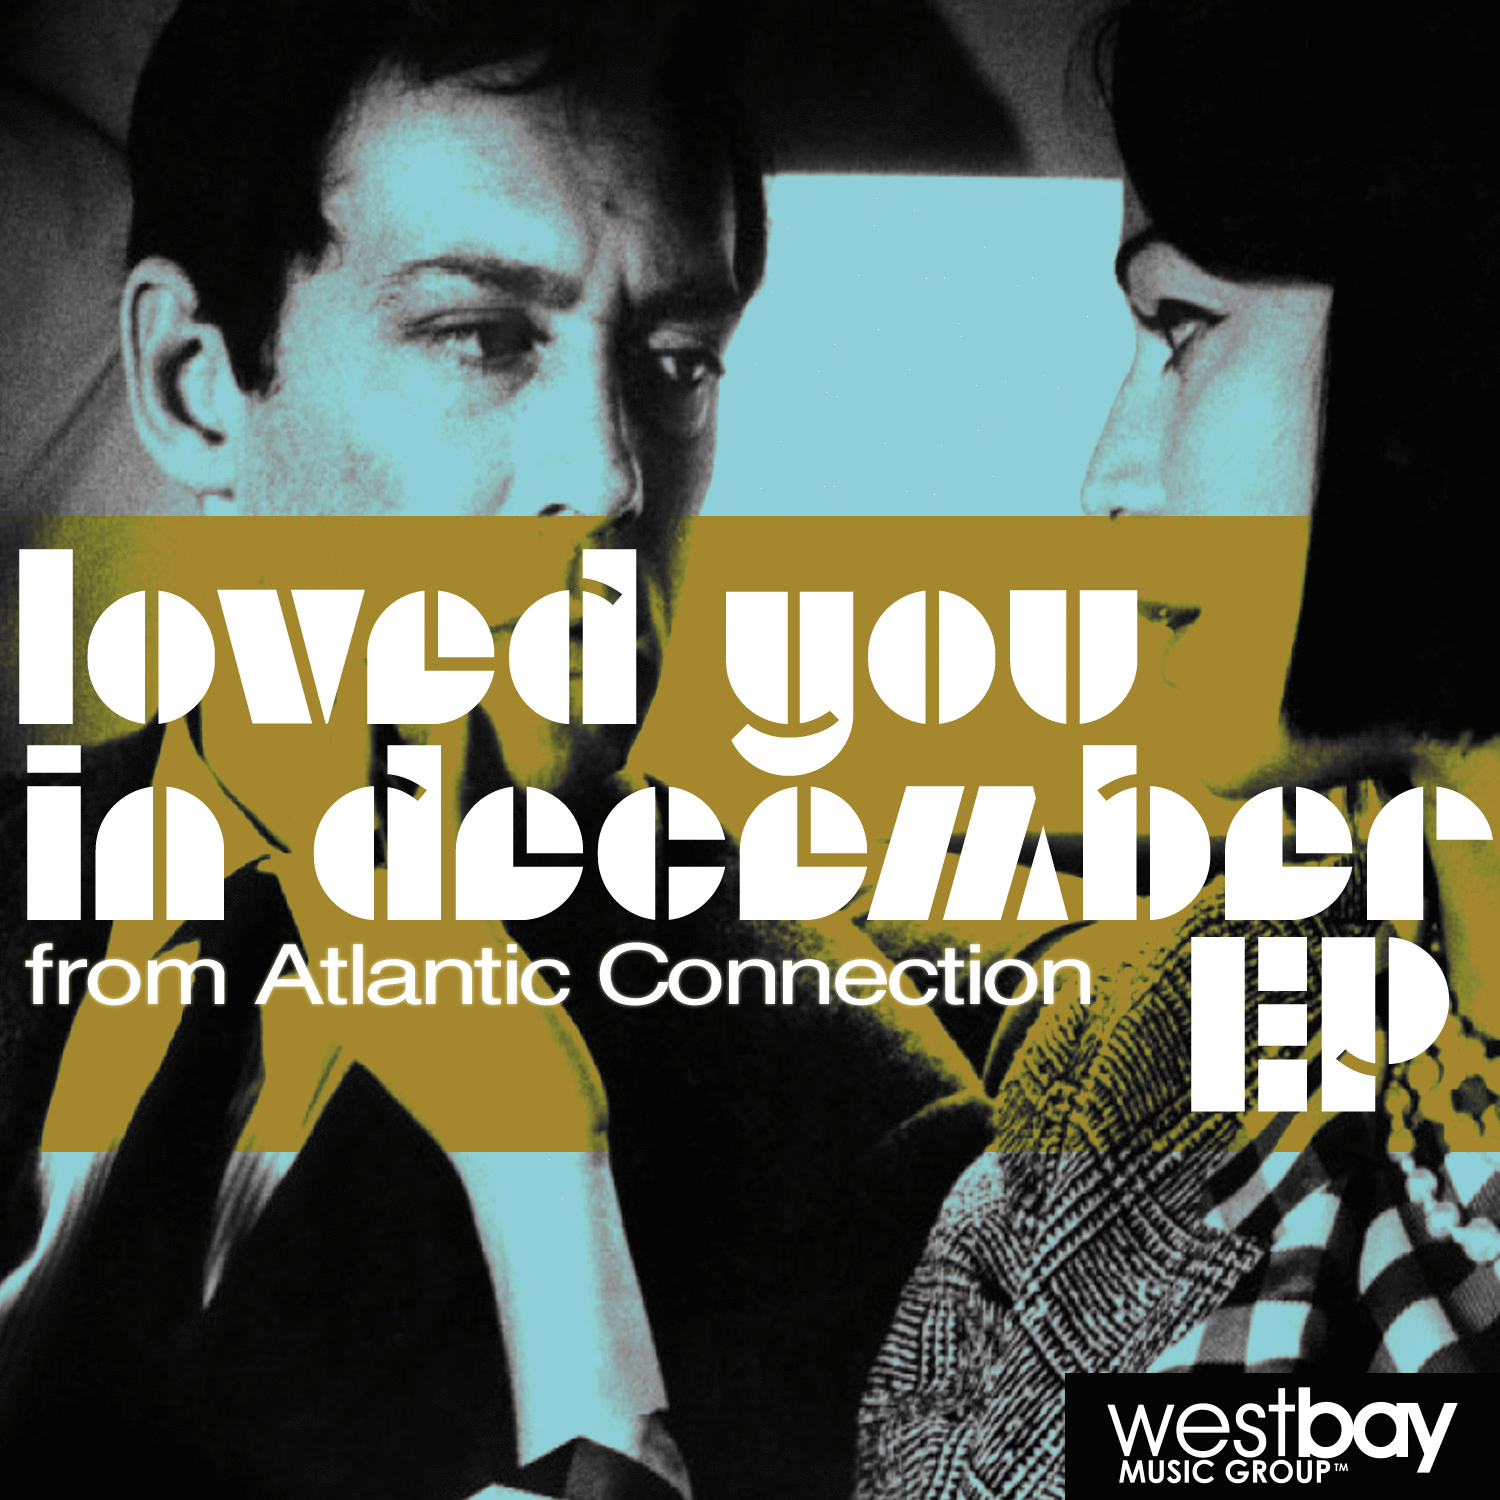 Atlantic Connection - Loved You in December EP